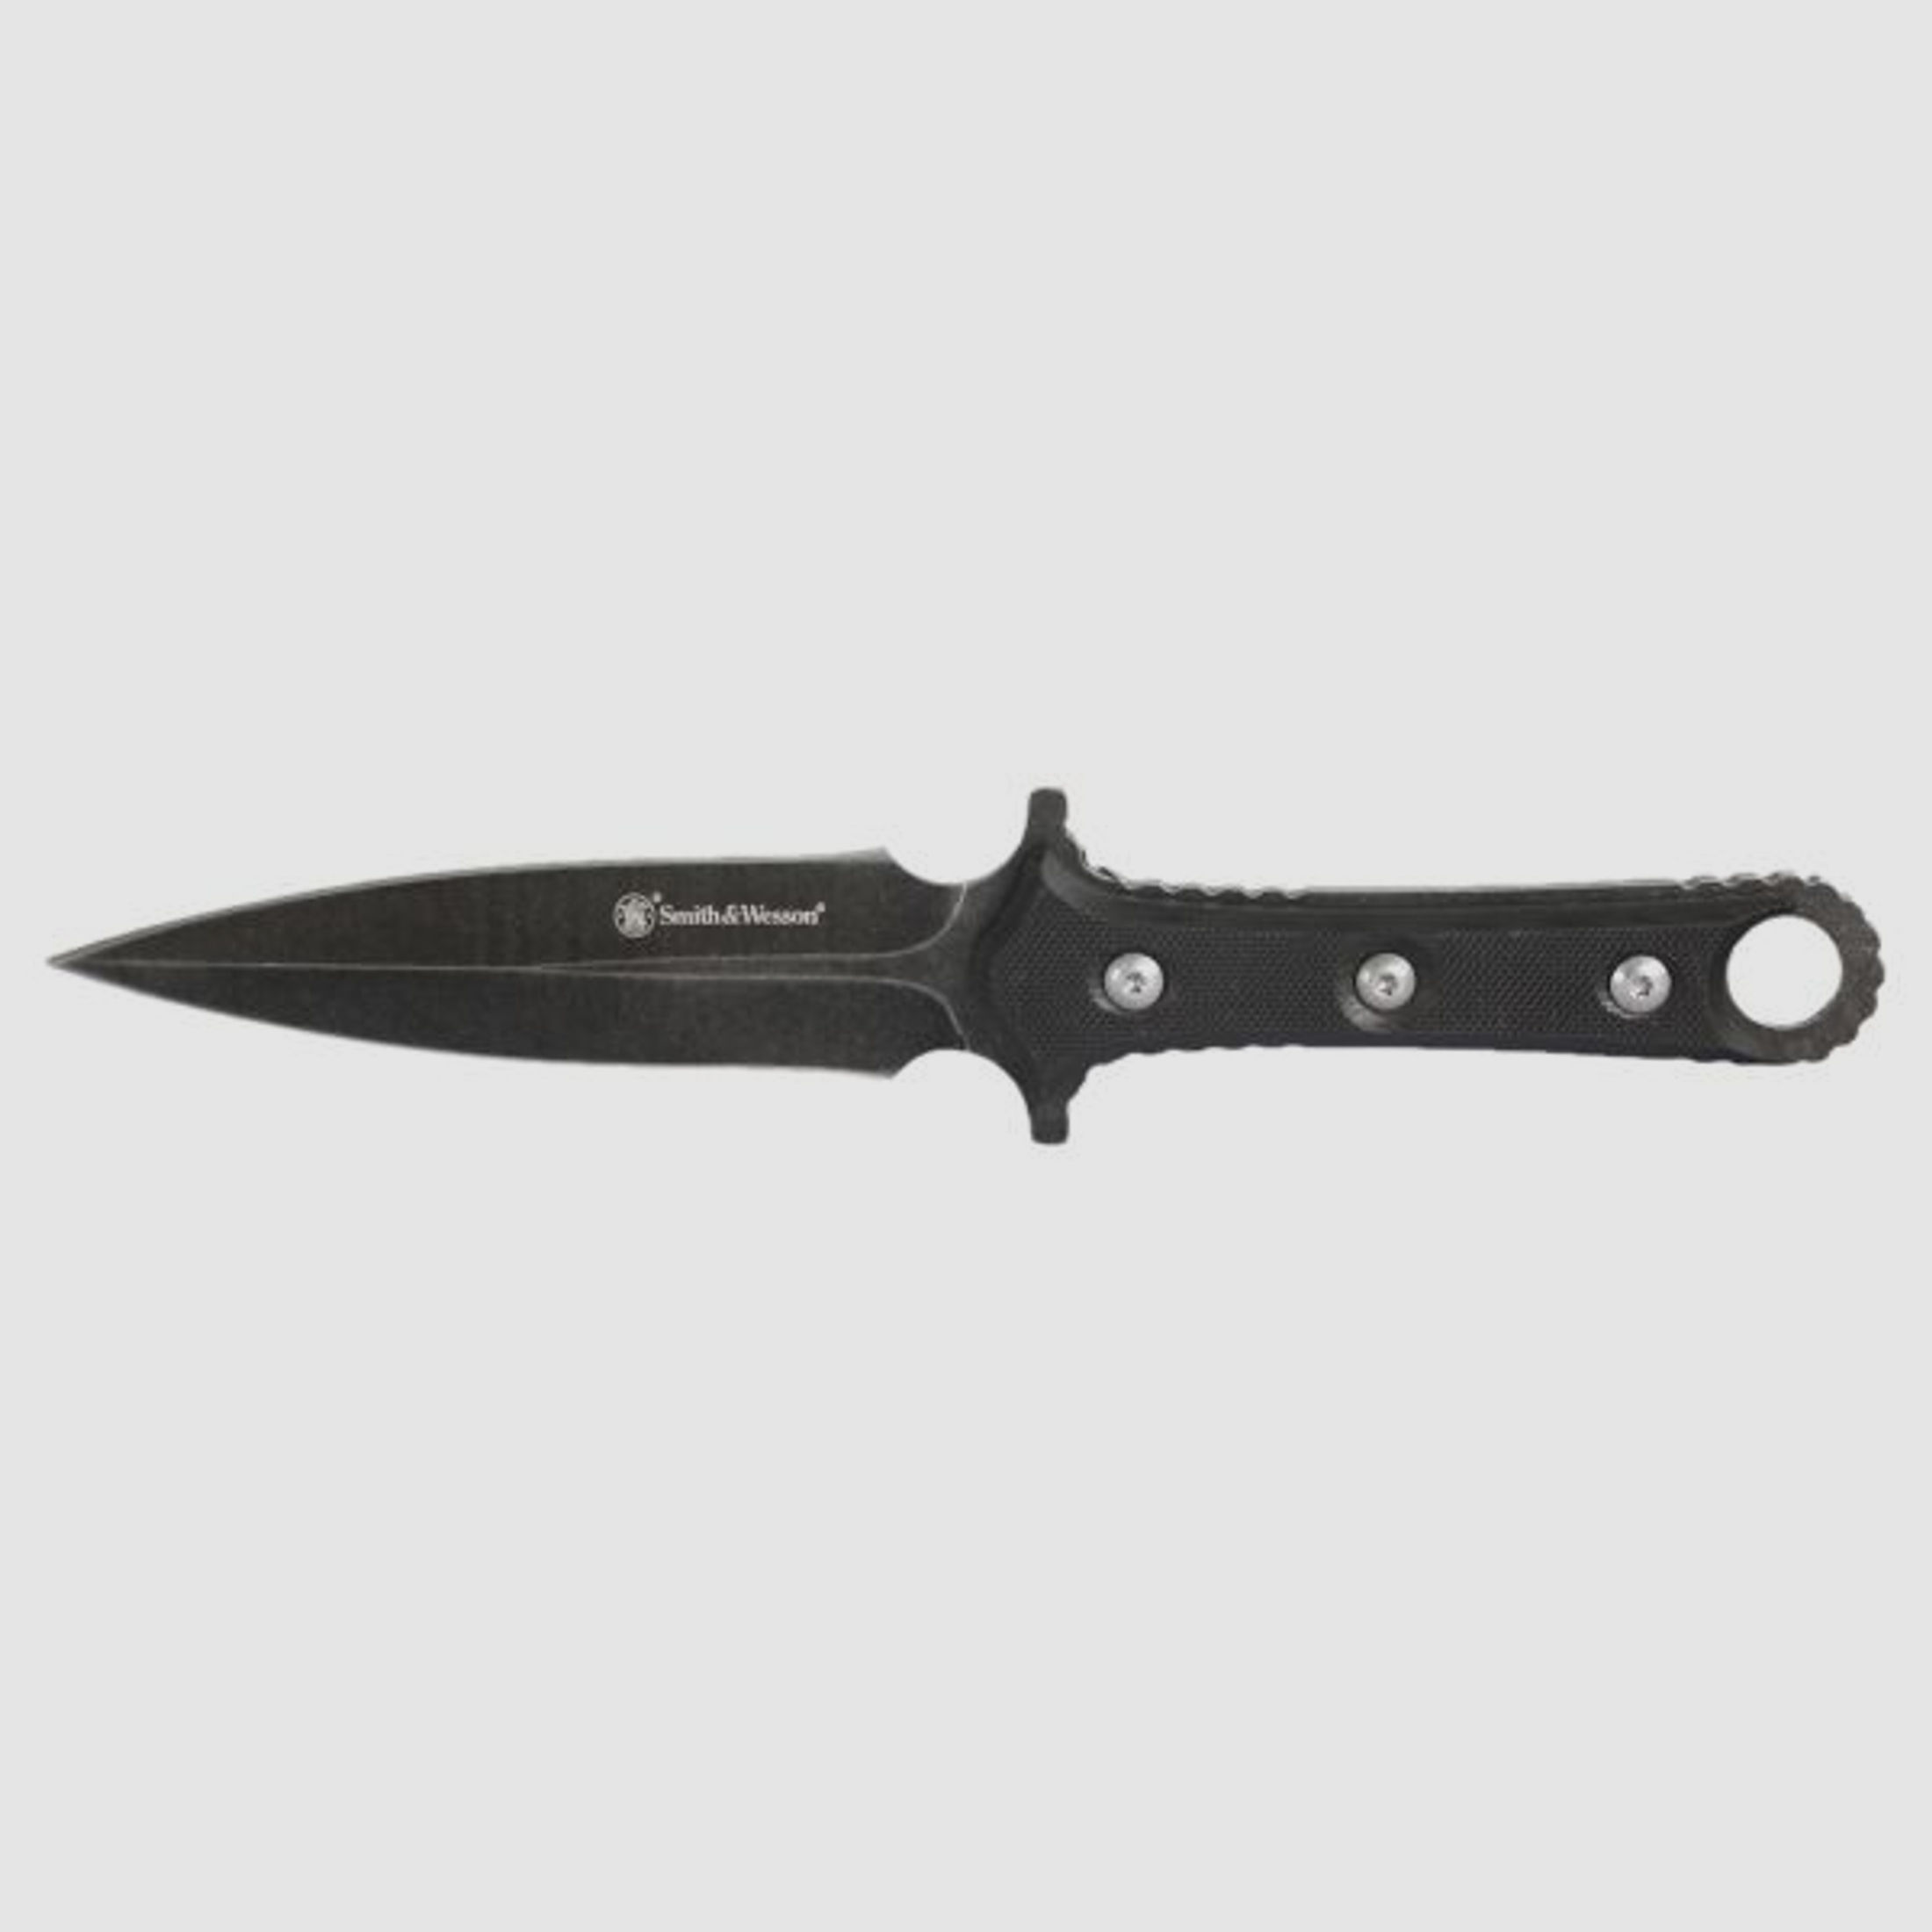 Smith & Wesson Smith &amp; Wesson Stiefeldolch stonewashed-finish